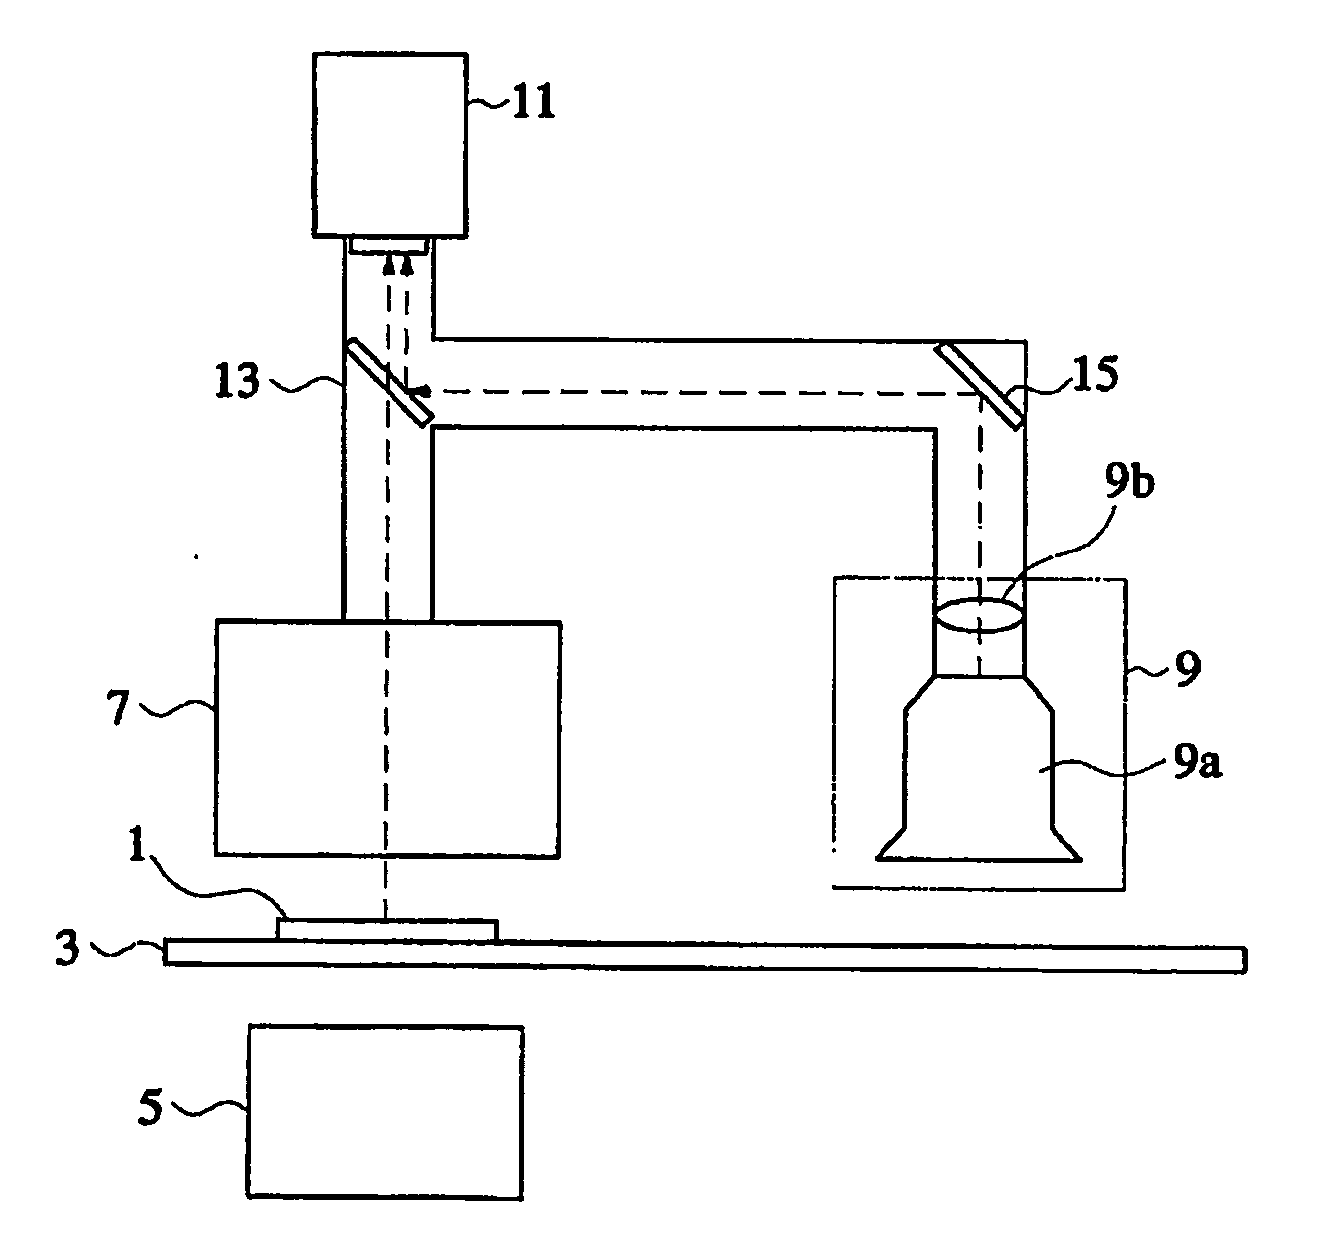 Printed circuit board inspection system combining x-ray inspection and visual inspection